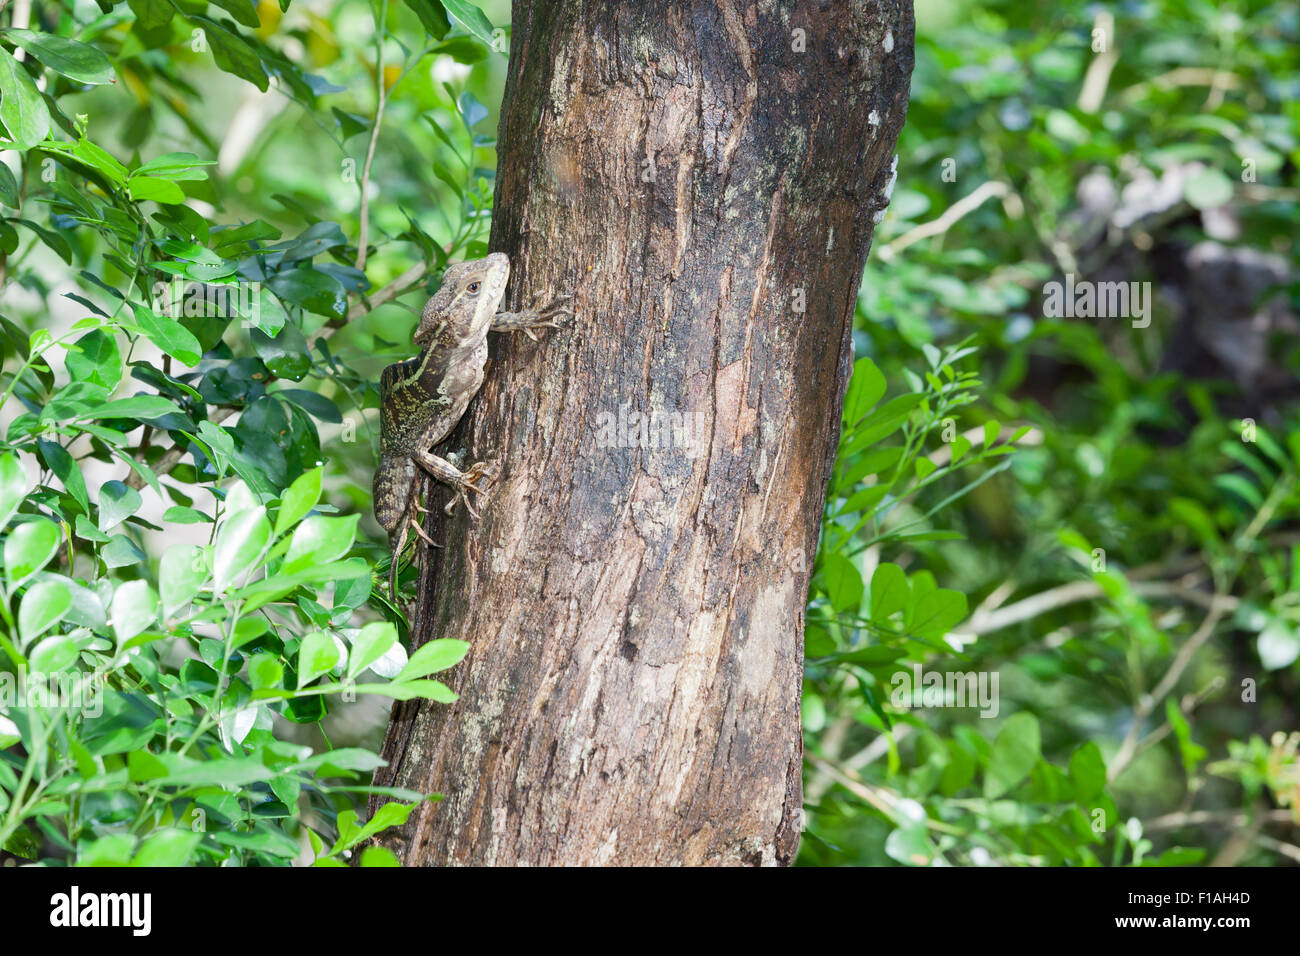 A small brown and green patterned lizard climbing up a tree in search of food in the Cayo District of Belize. Stock Photo